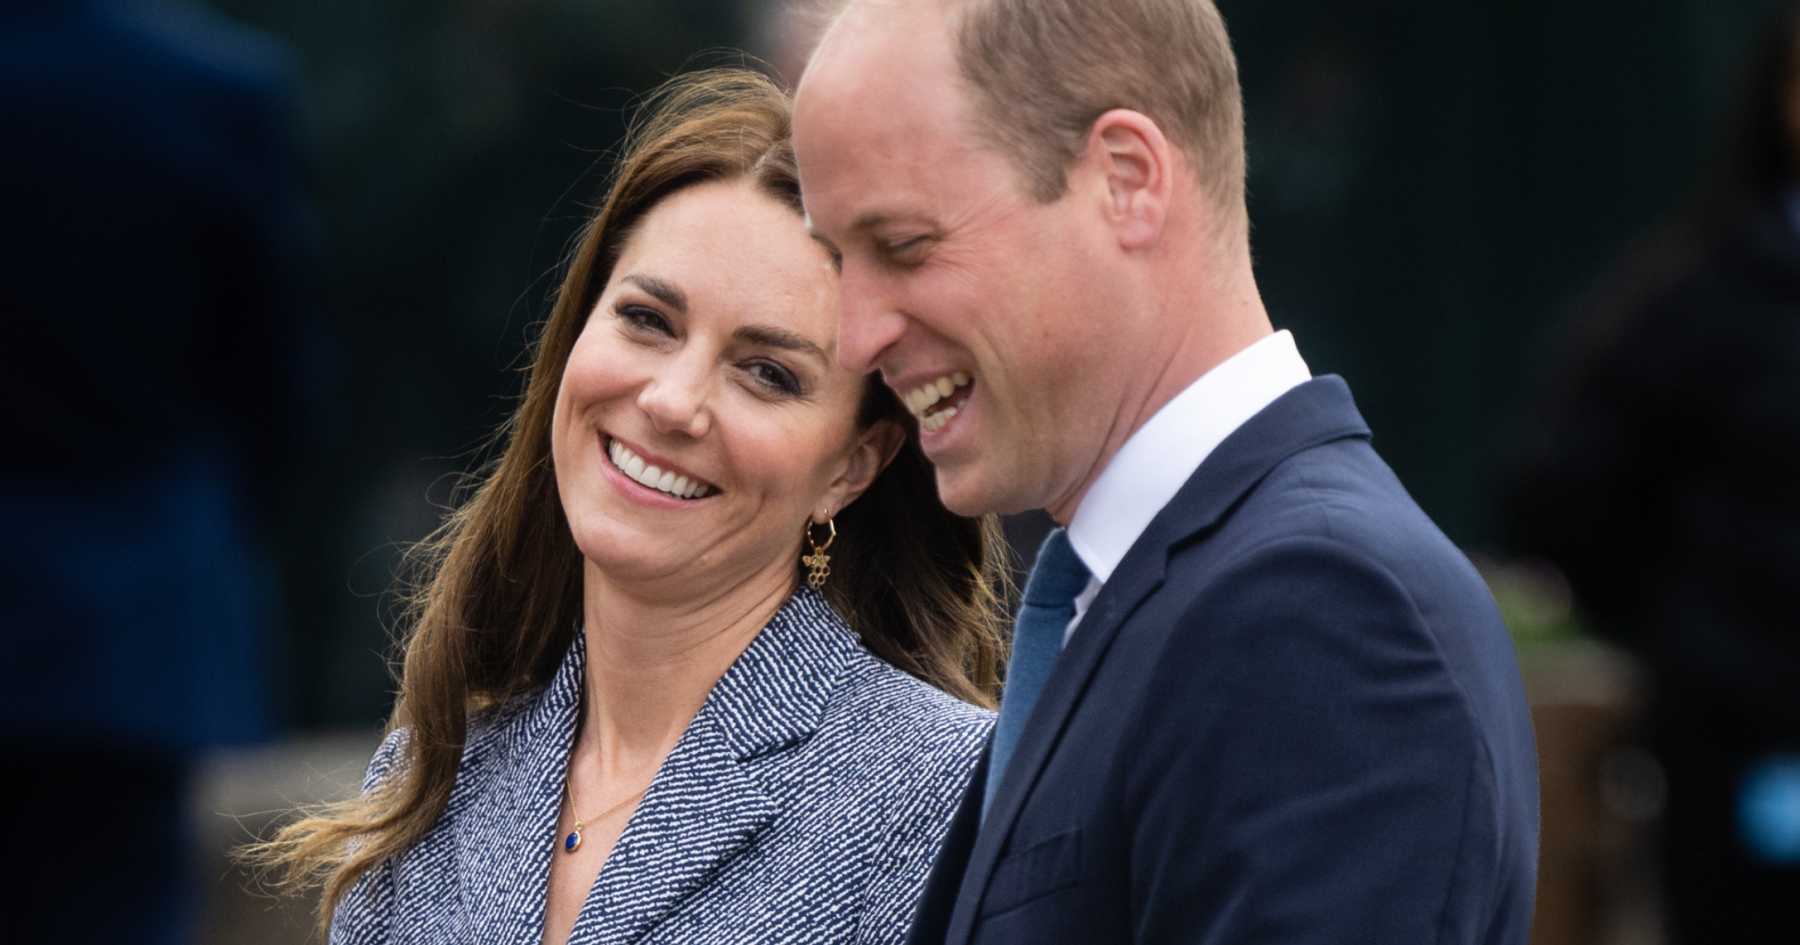 William & Kate Prove They're Serious About Modernizing the Monarchy by ...